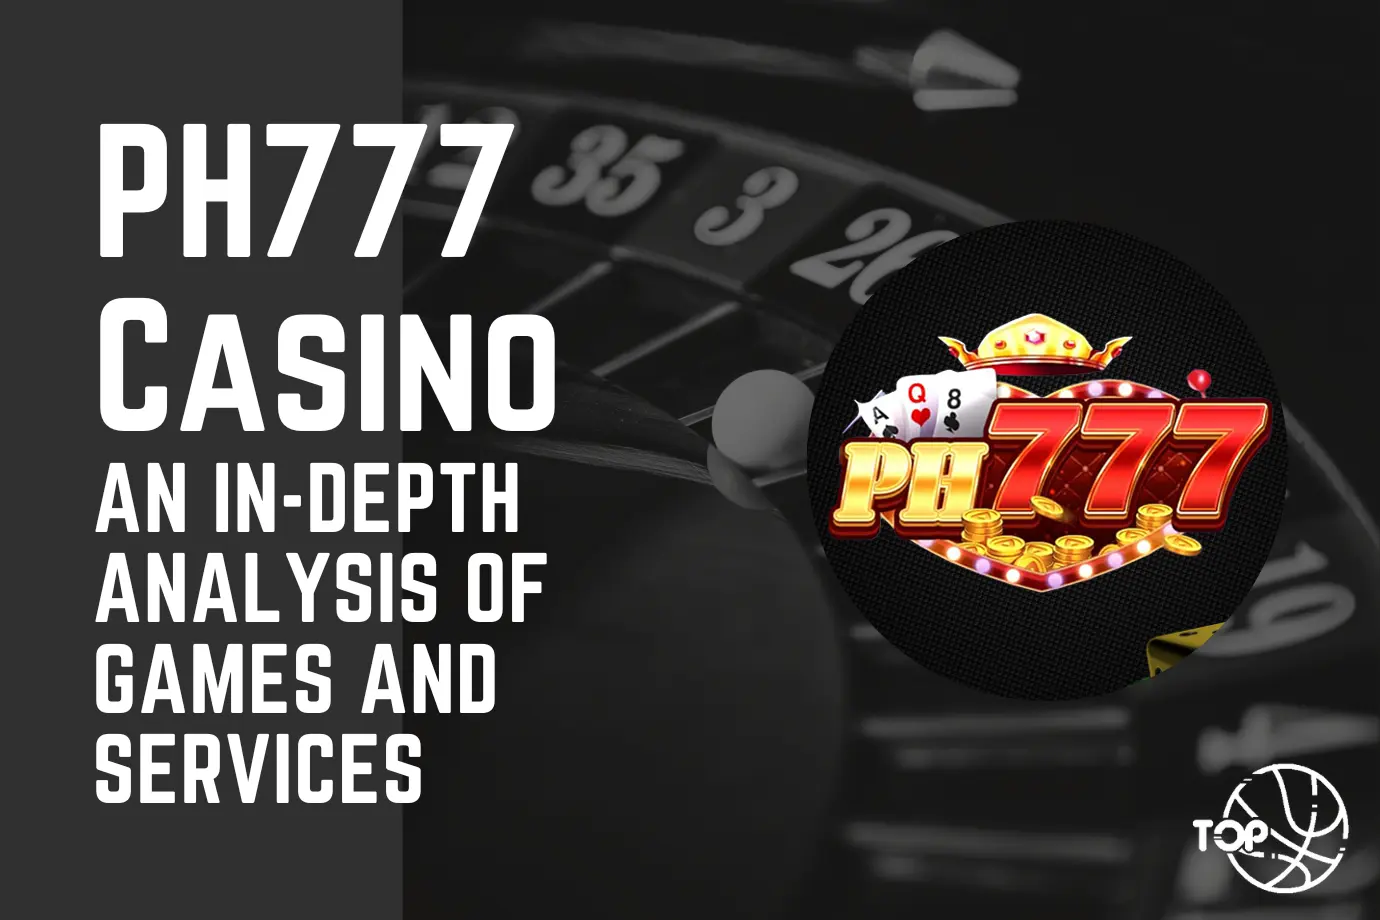 PH777 Casino: An In-Depth Analysis of Games and Services